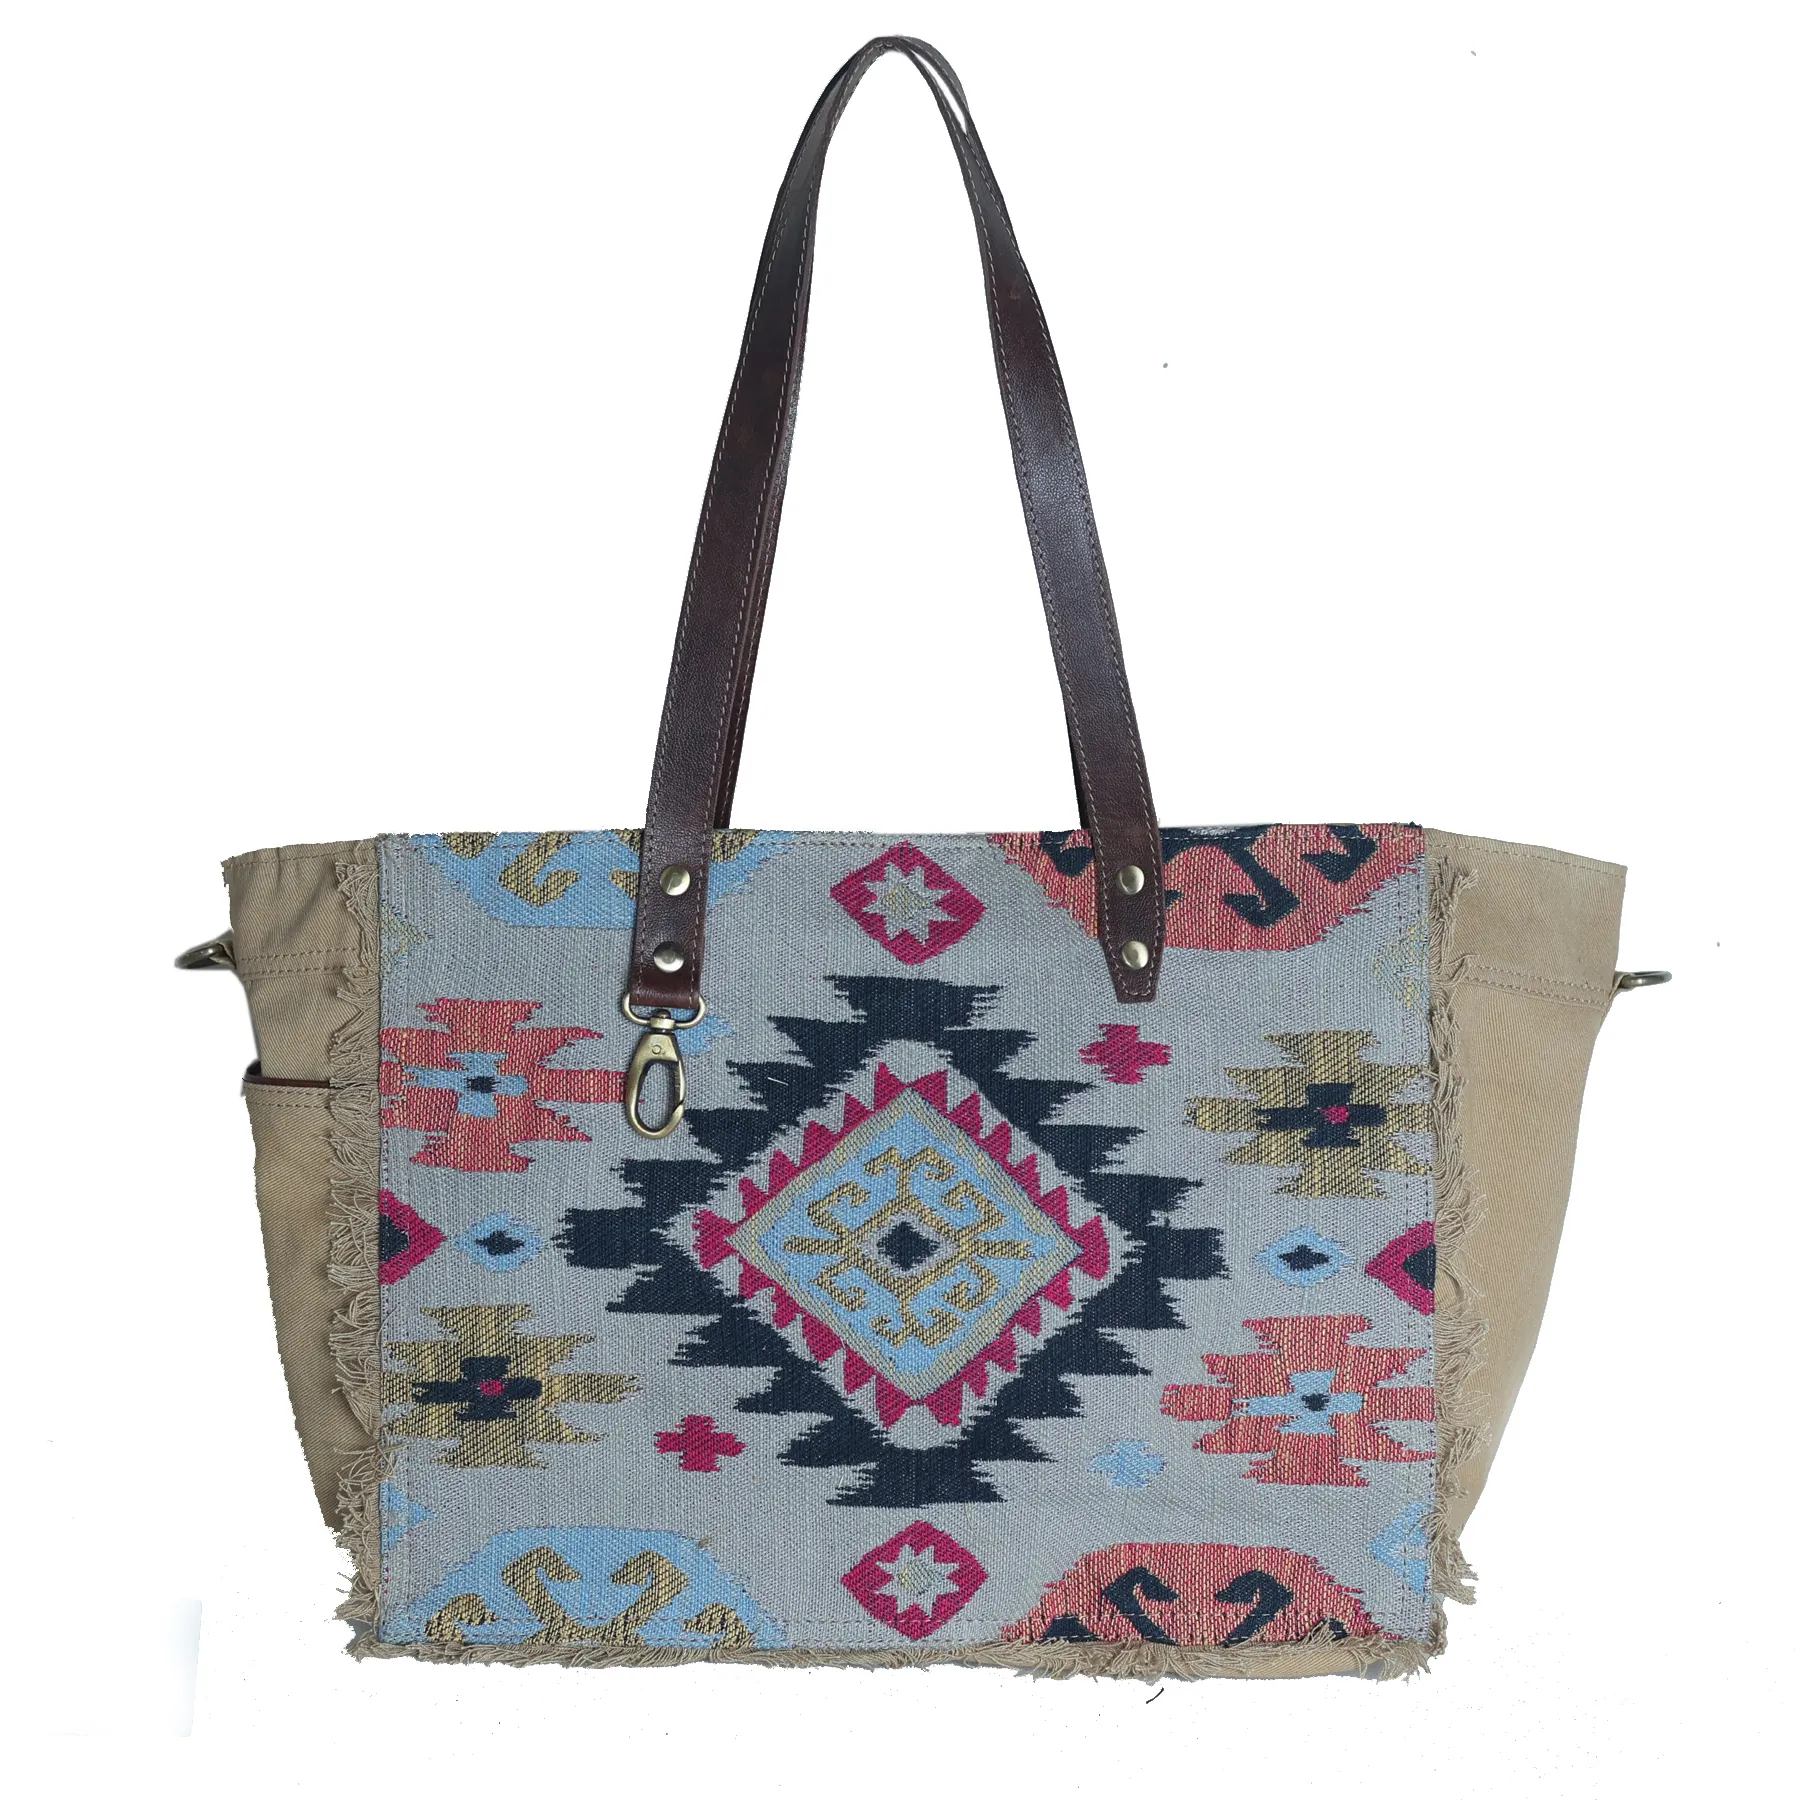 Western bags Handmade cotton dhurri tote handbags with leather handle | Bag measures 16" L x 12" H | R2110-205